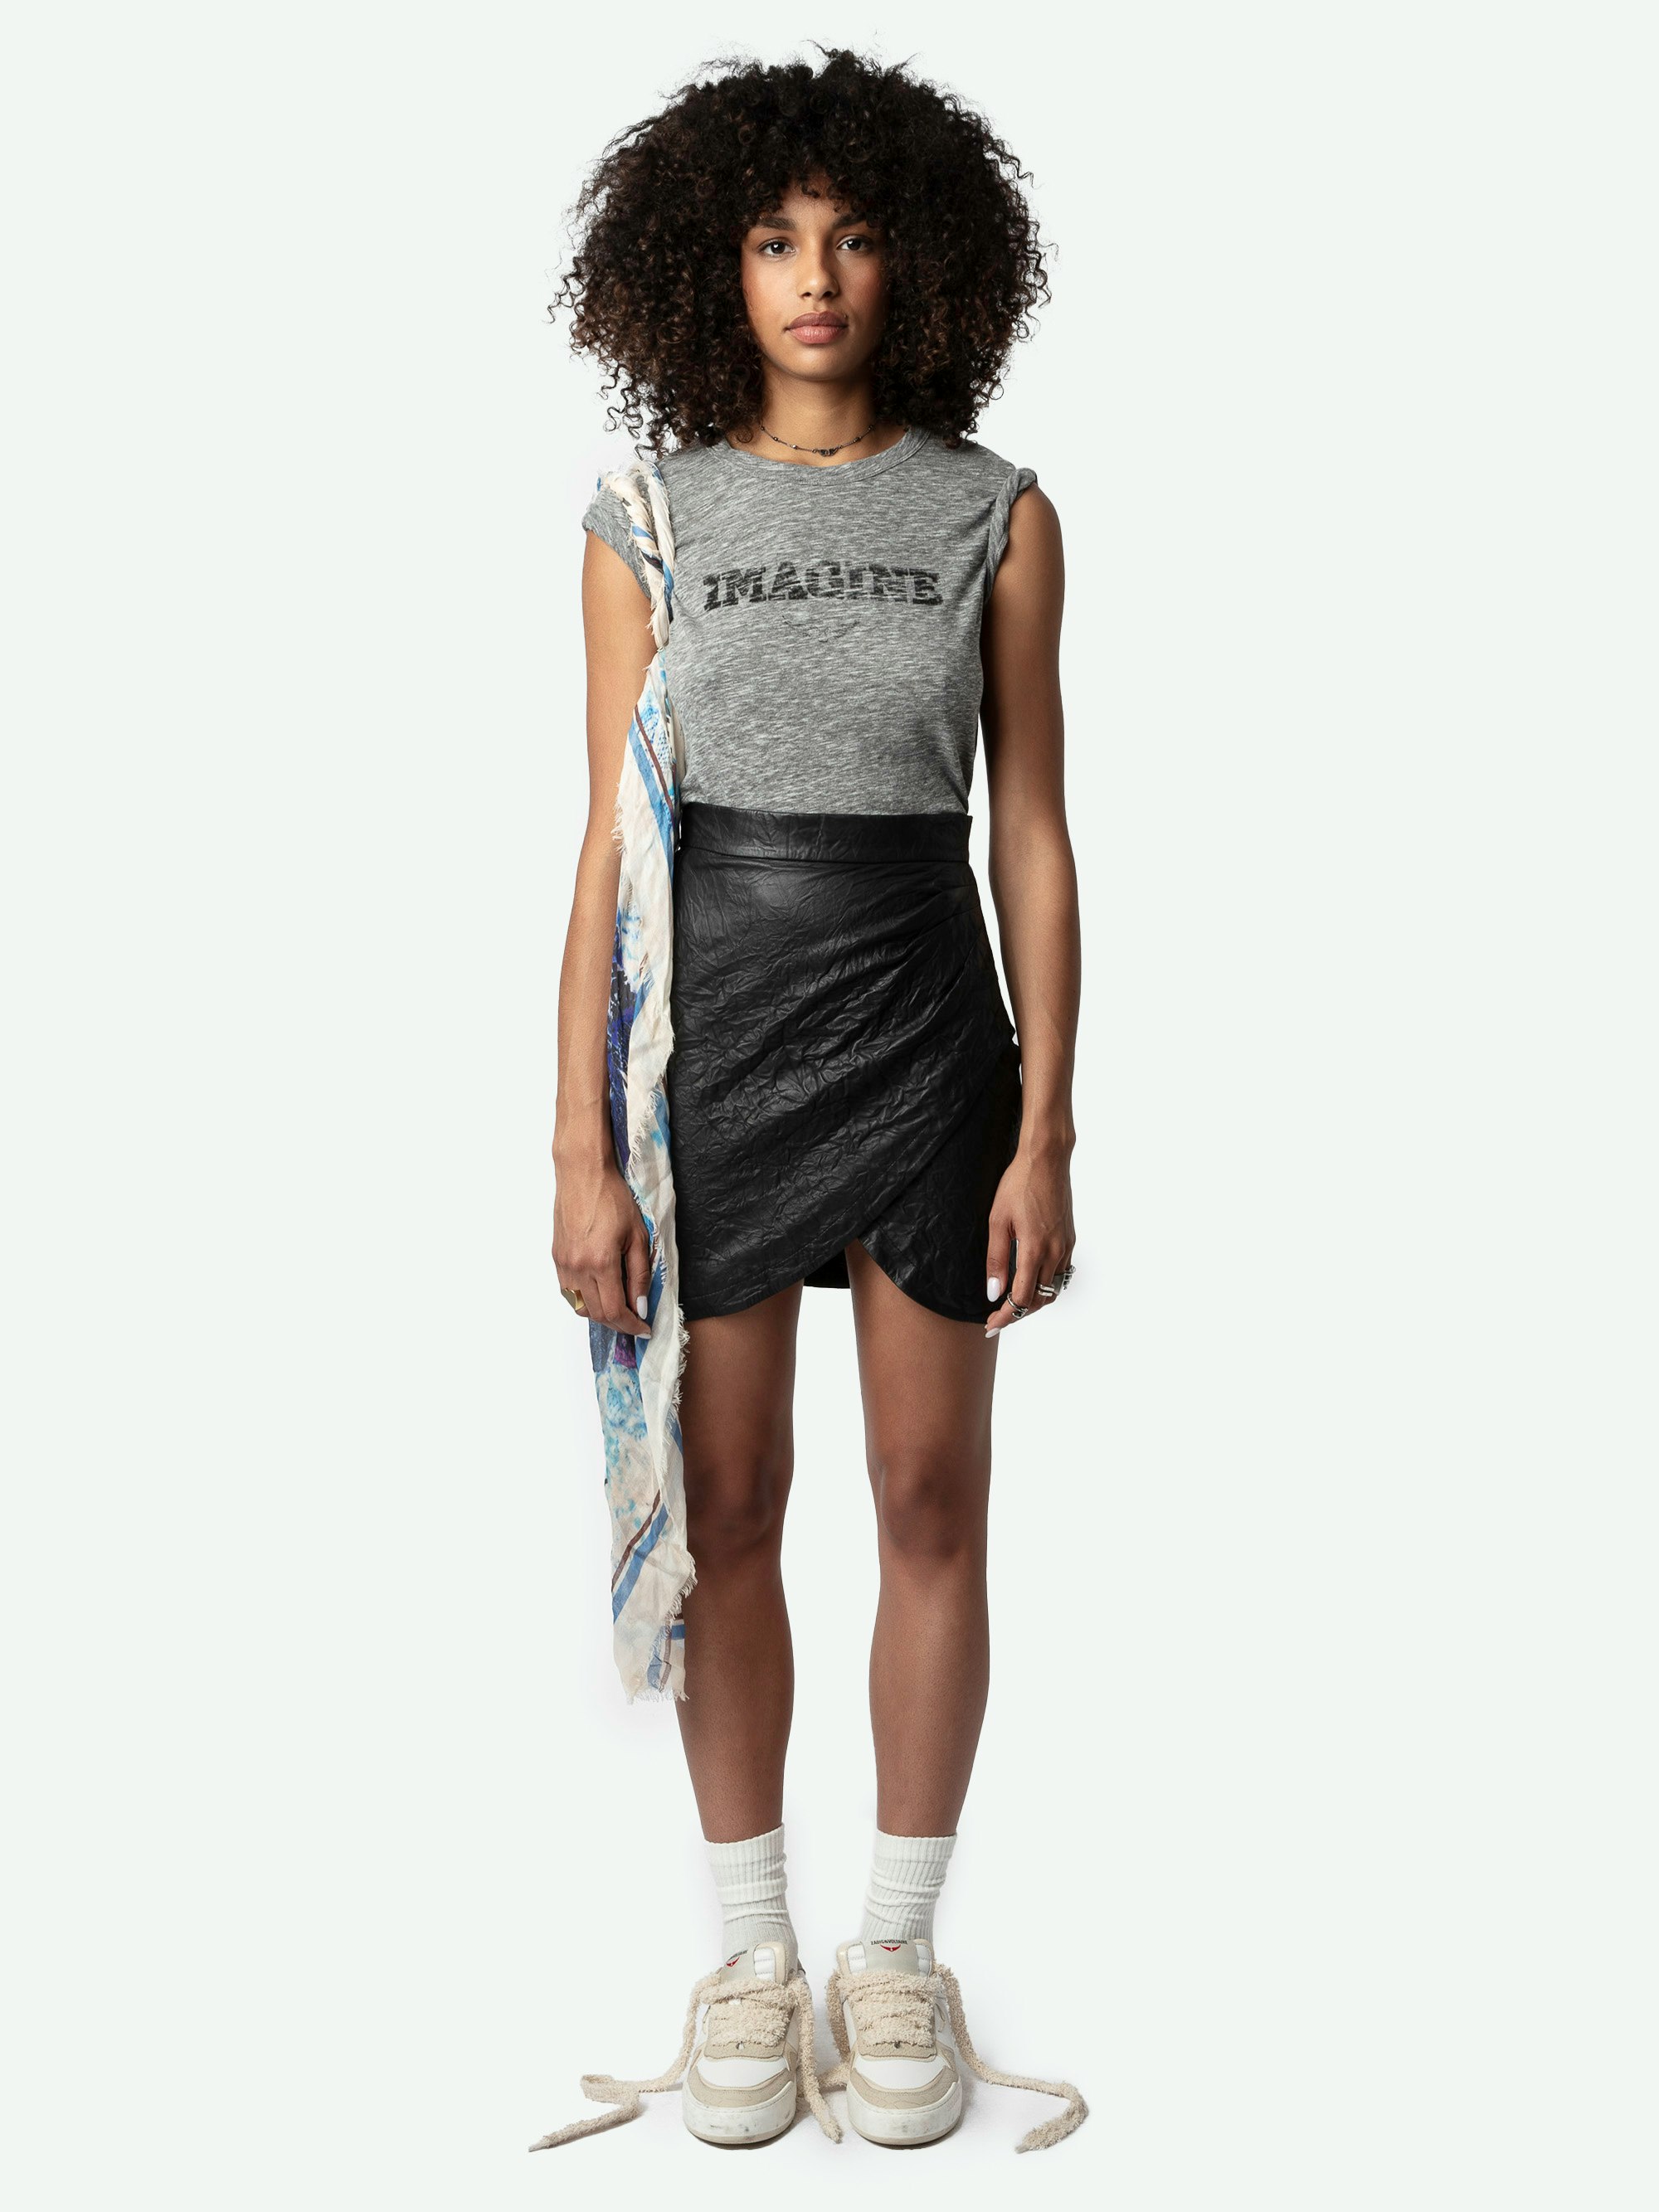 Woop Imagine T-shirt - Short-sleeved, mottled grey T-shirt with worn-effect “Imagine” print and wings on the front.